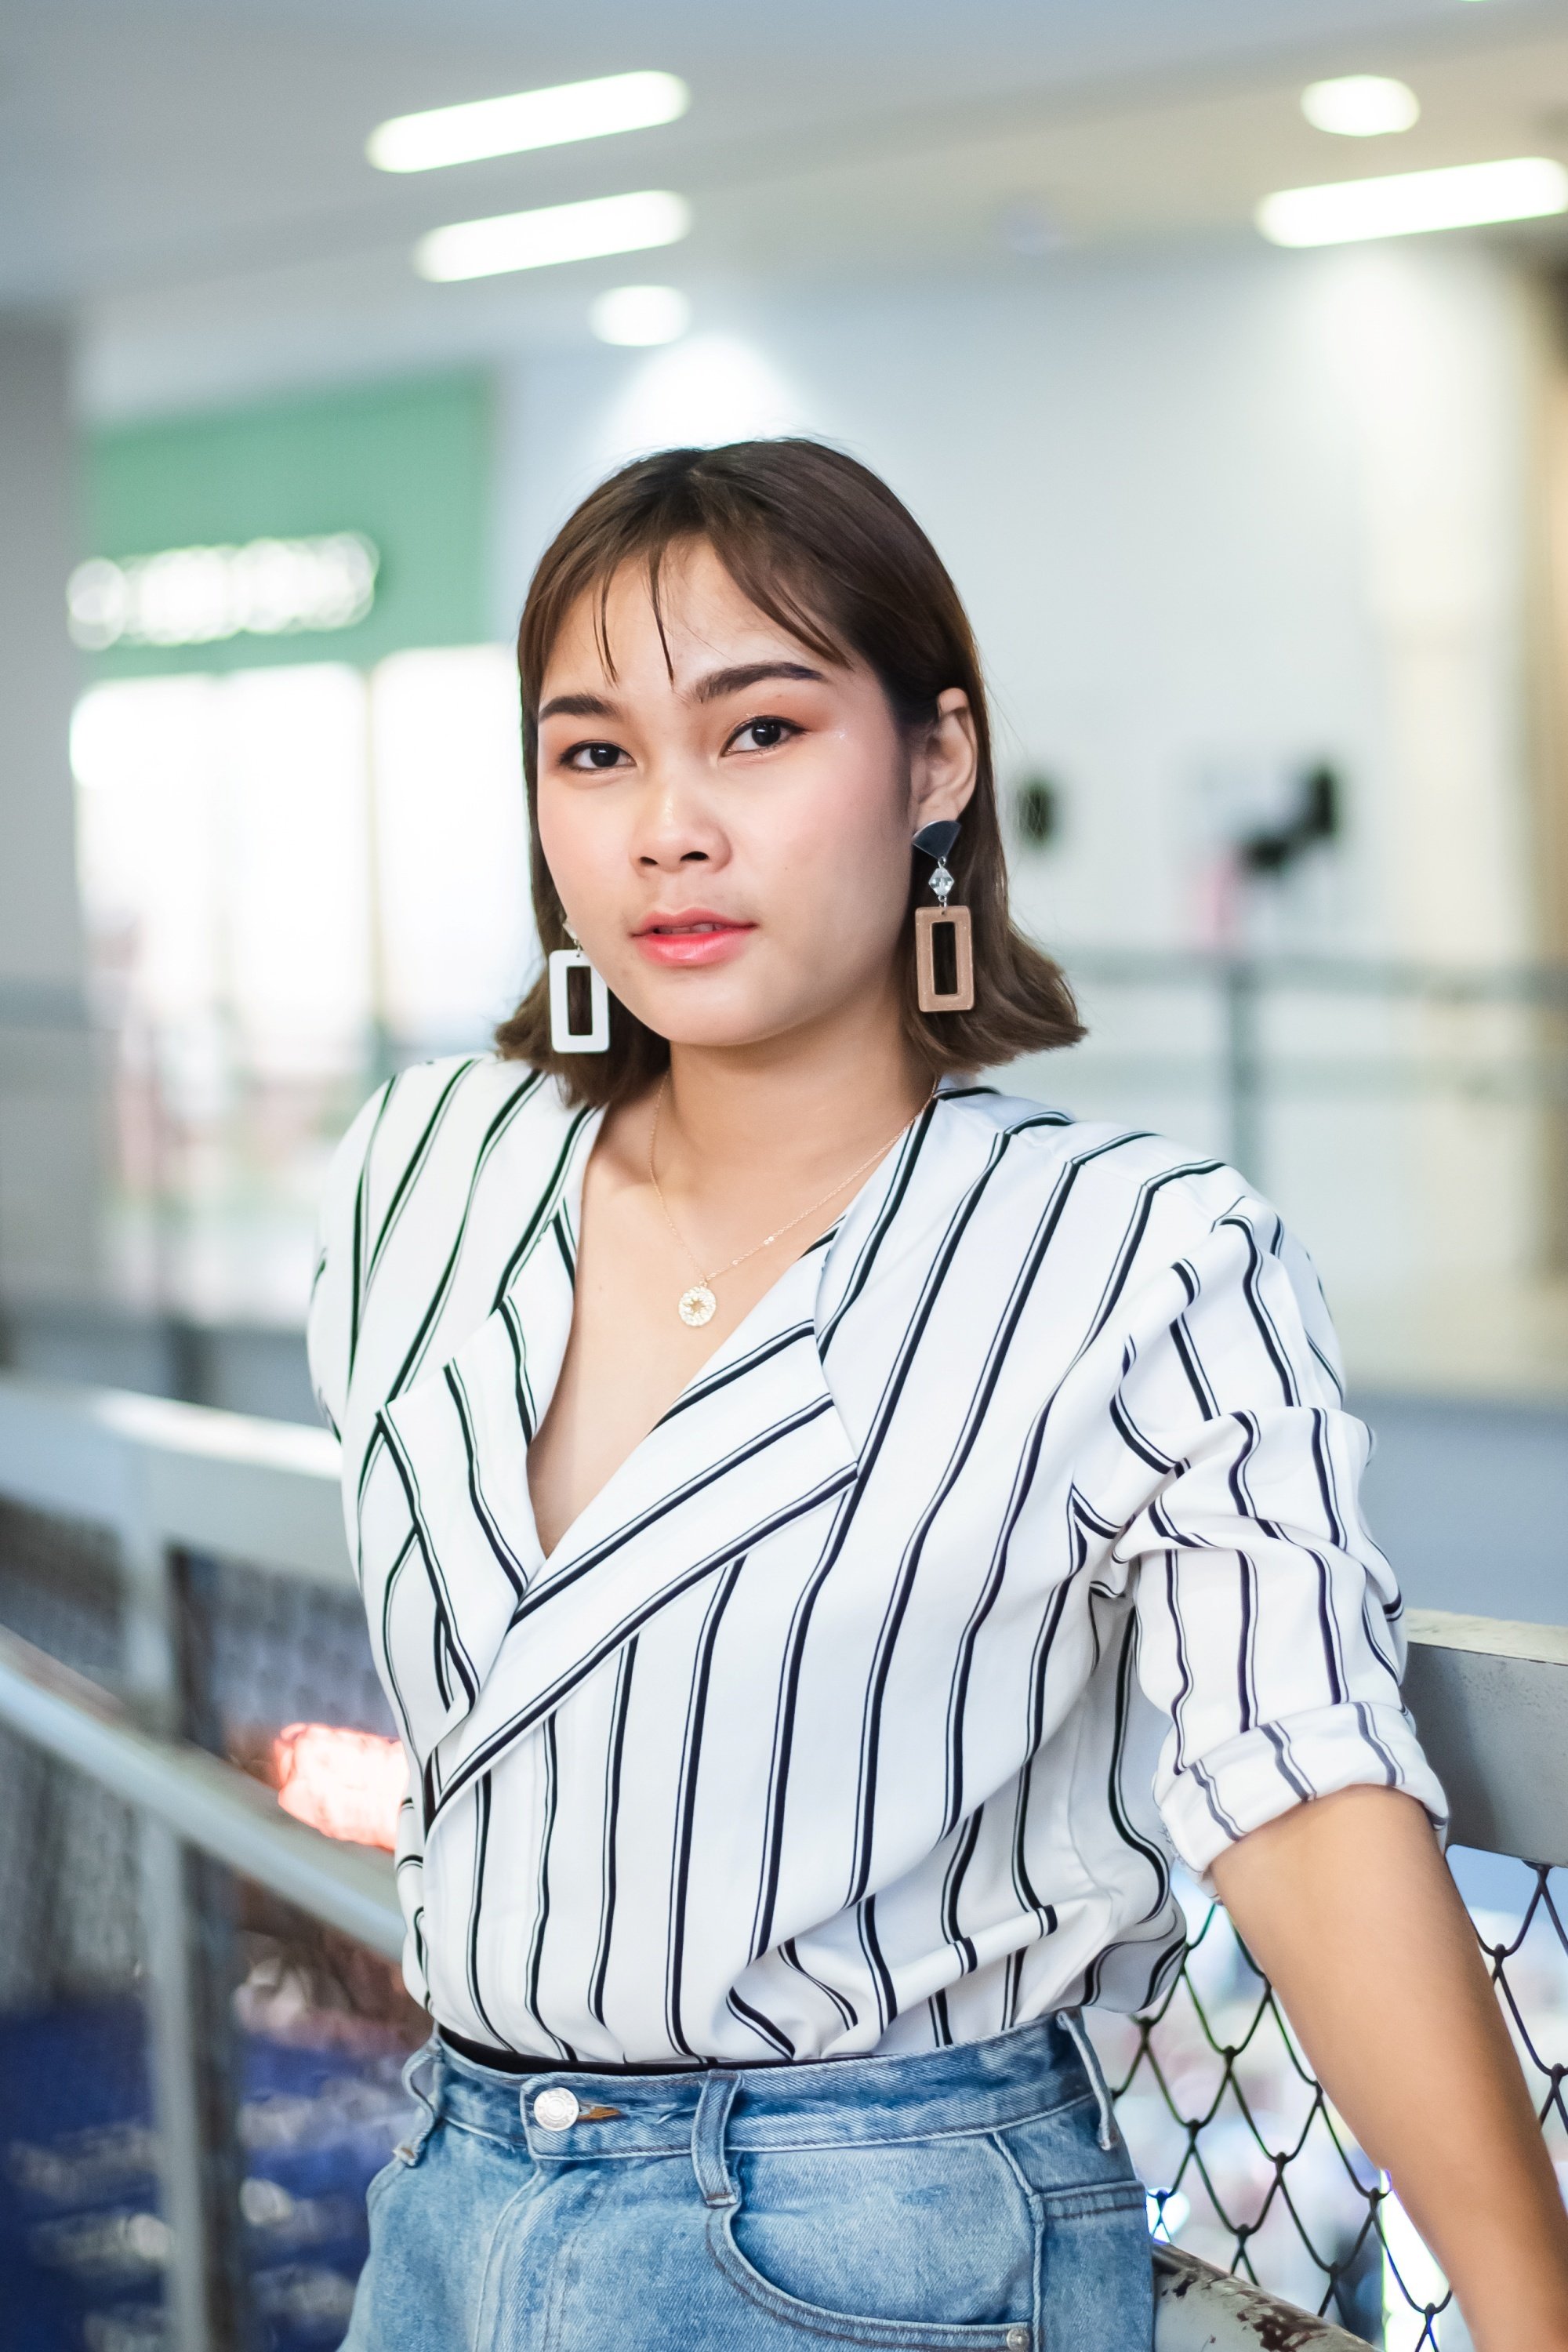 Asian woman with a short hairstyle for round face wearing a striped blouse